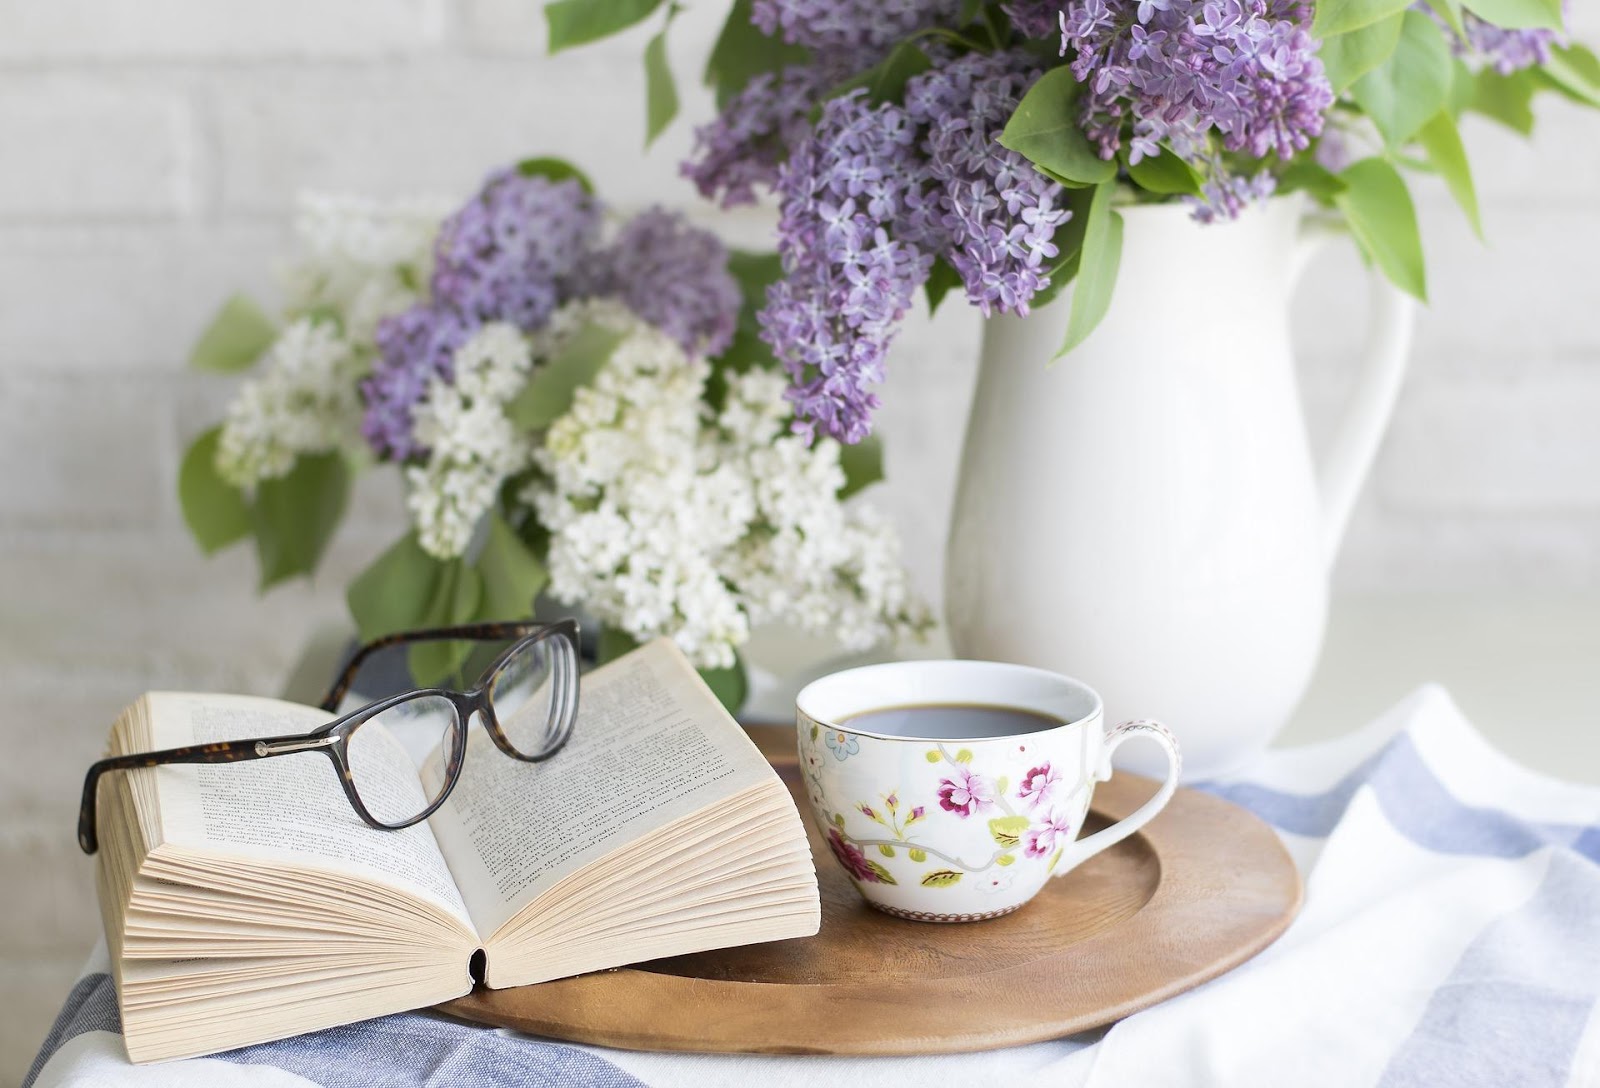 Book, flowers, and coffee.